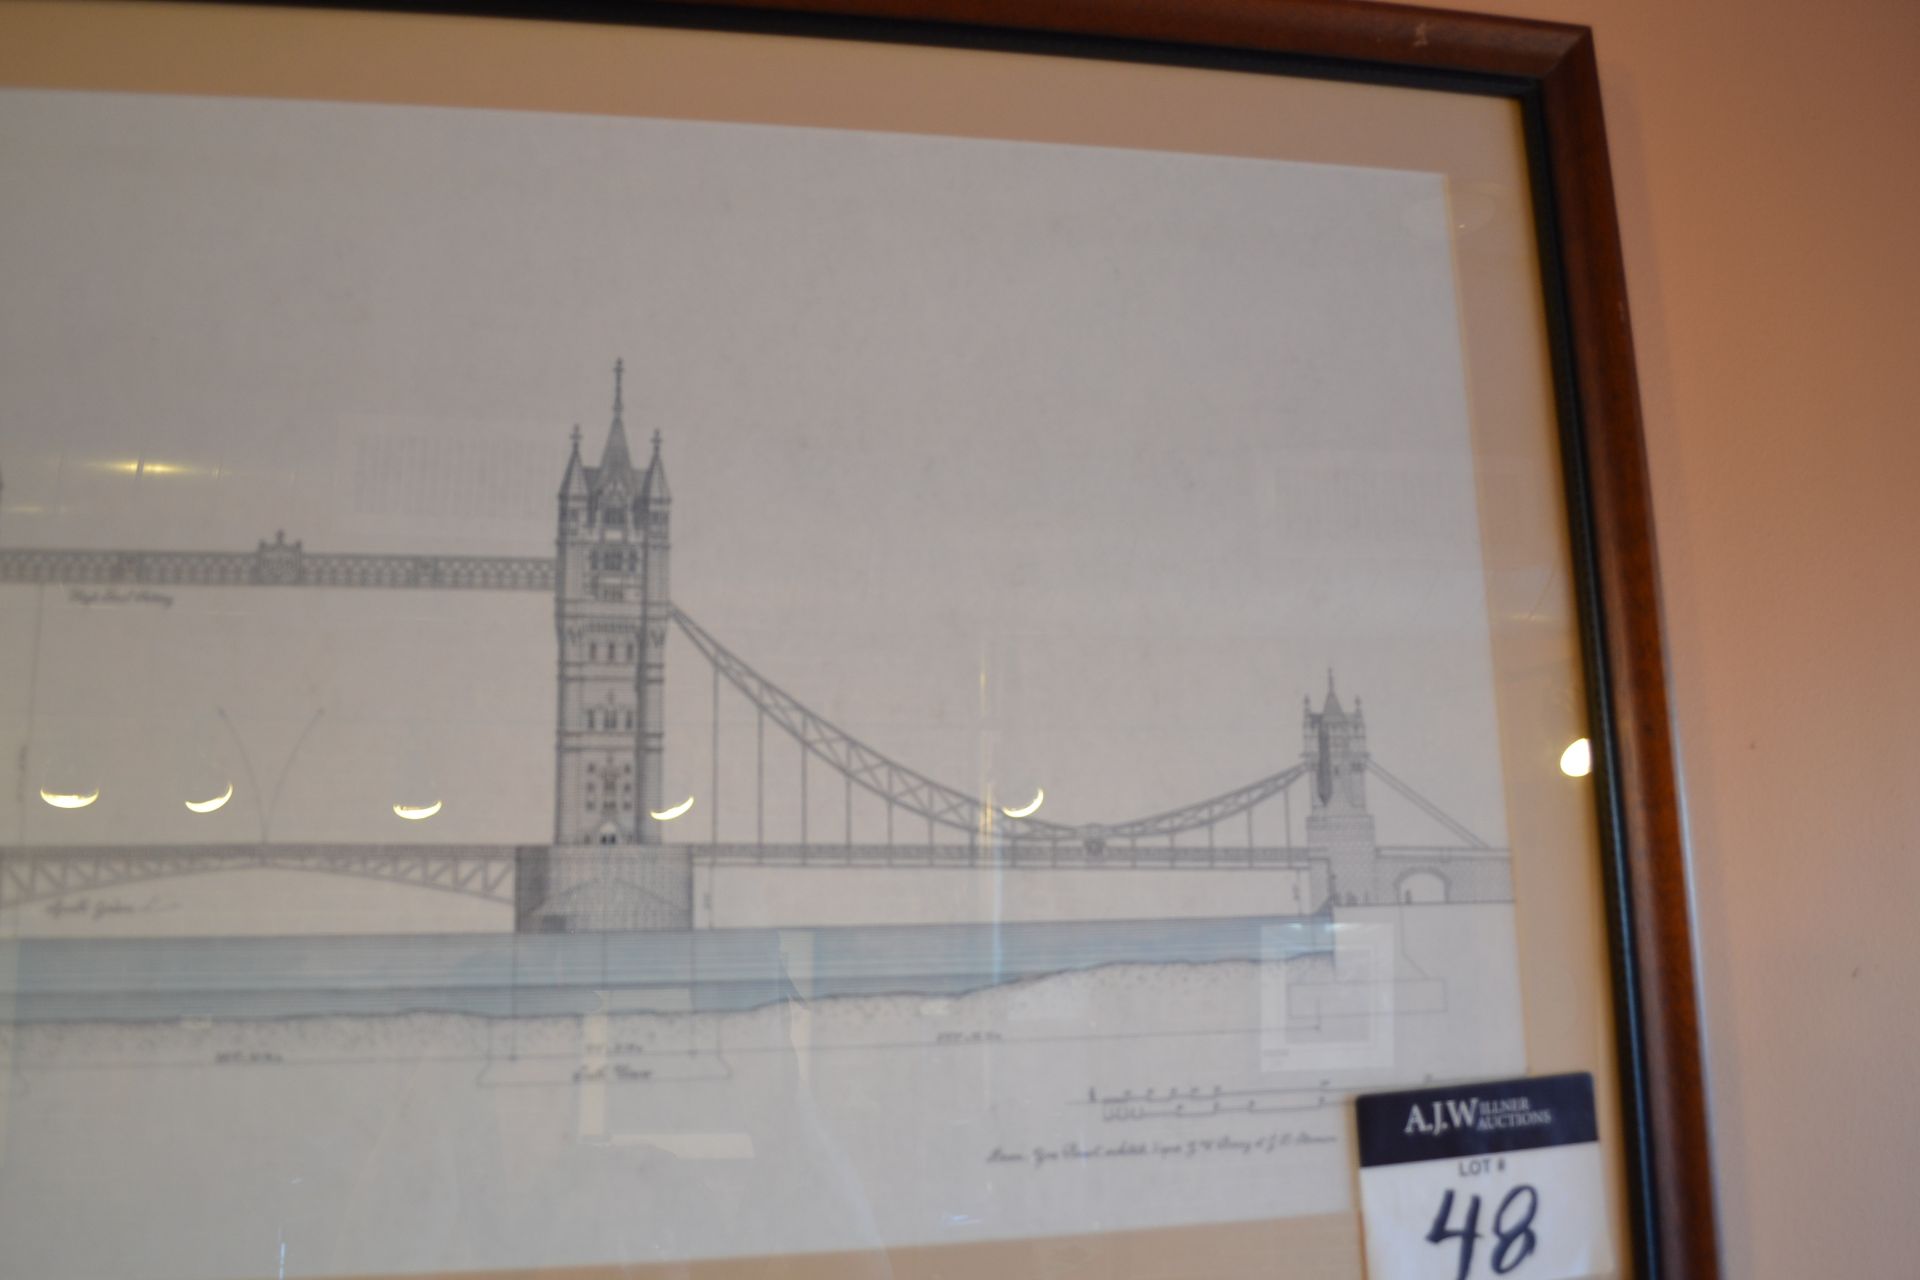 the Tower Bridge of London, Framed Print 42"x22" - Image 3 of 3